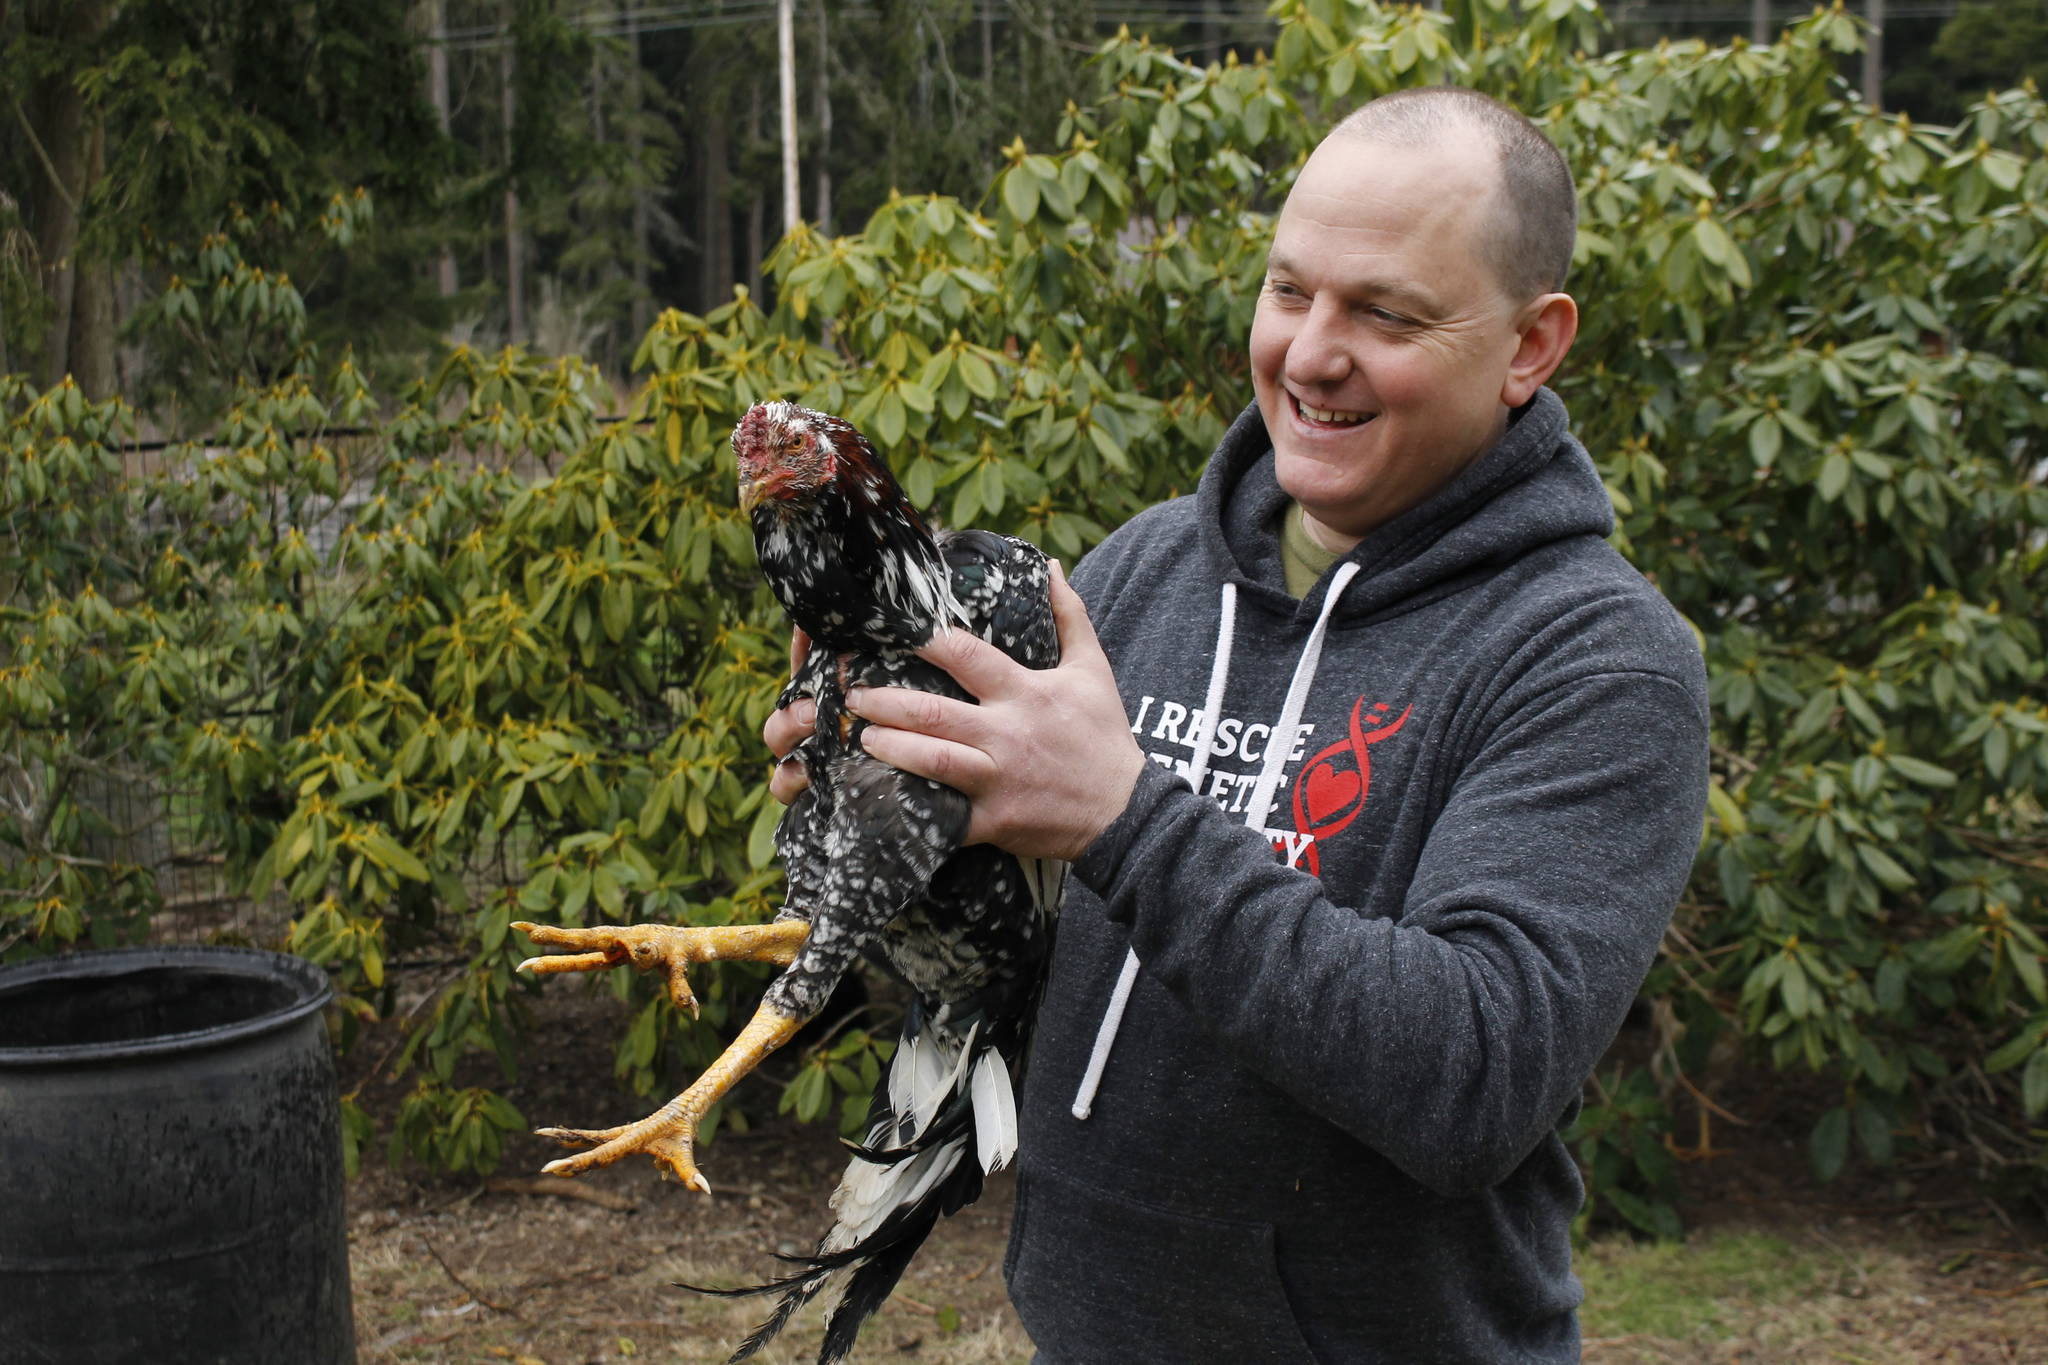 George Cerrato and his wife, Shuna, own Cascadia Heritage Farm in North Whidbey. They are breeding and preserving critically endangered birds. Photo by Kira Erickson/Whidbey News Group